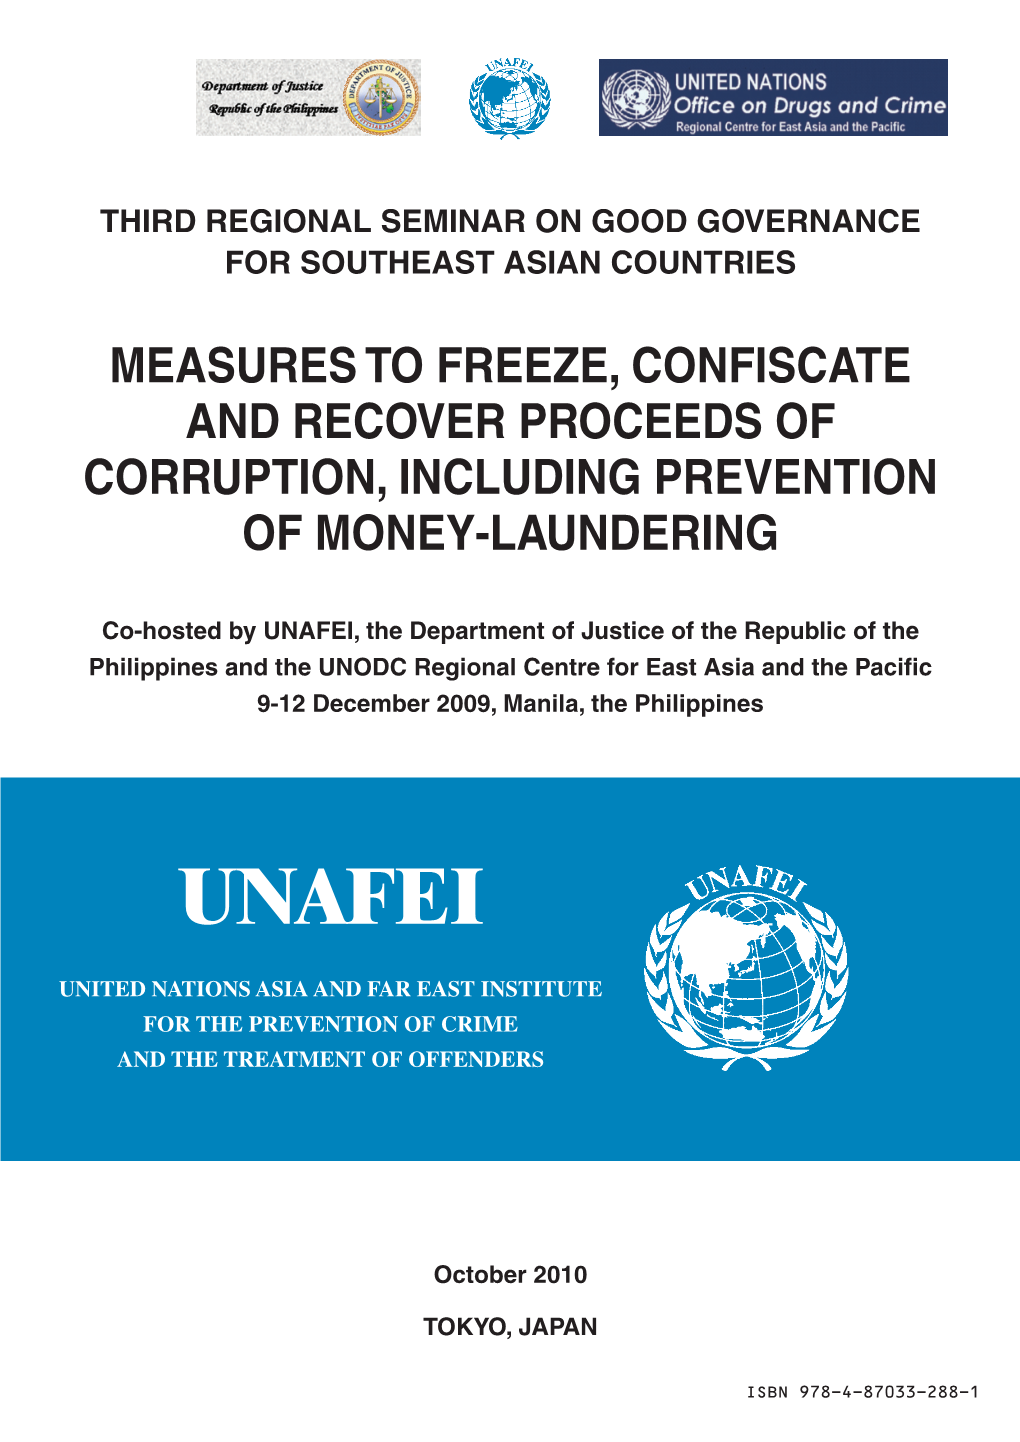 Measures to Freeze, Confiscate and Recover Proceeds of Corruption, Including Prevention of Money-Laundering